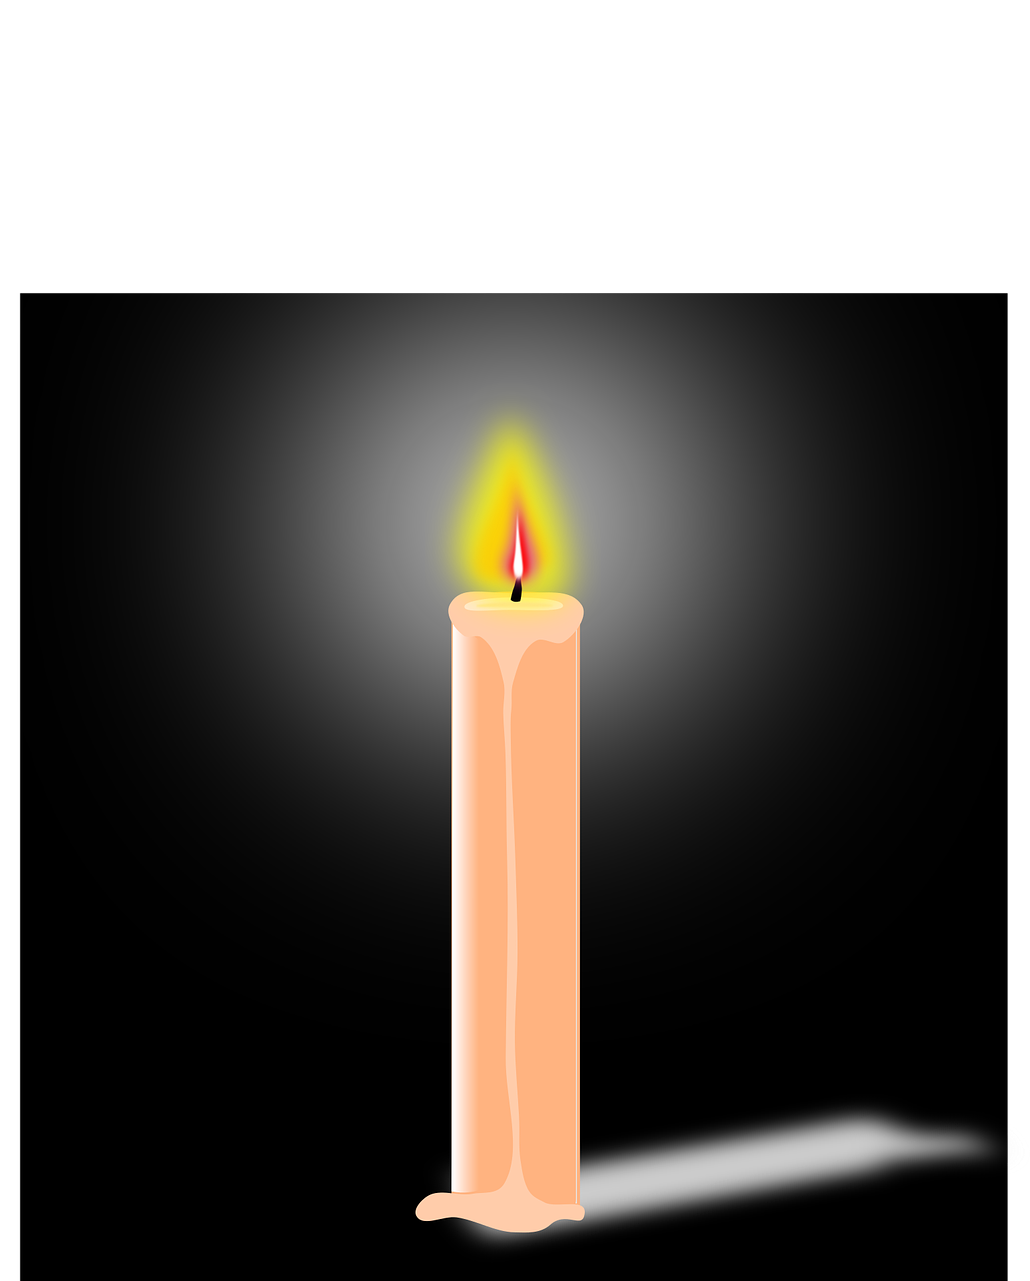 A Lit Candle With A Flame